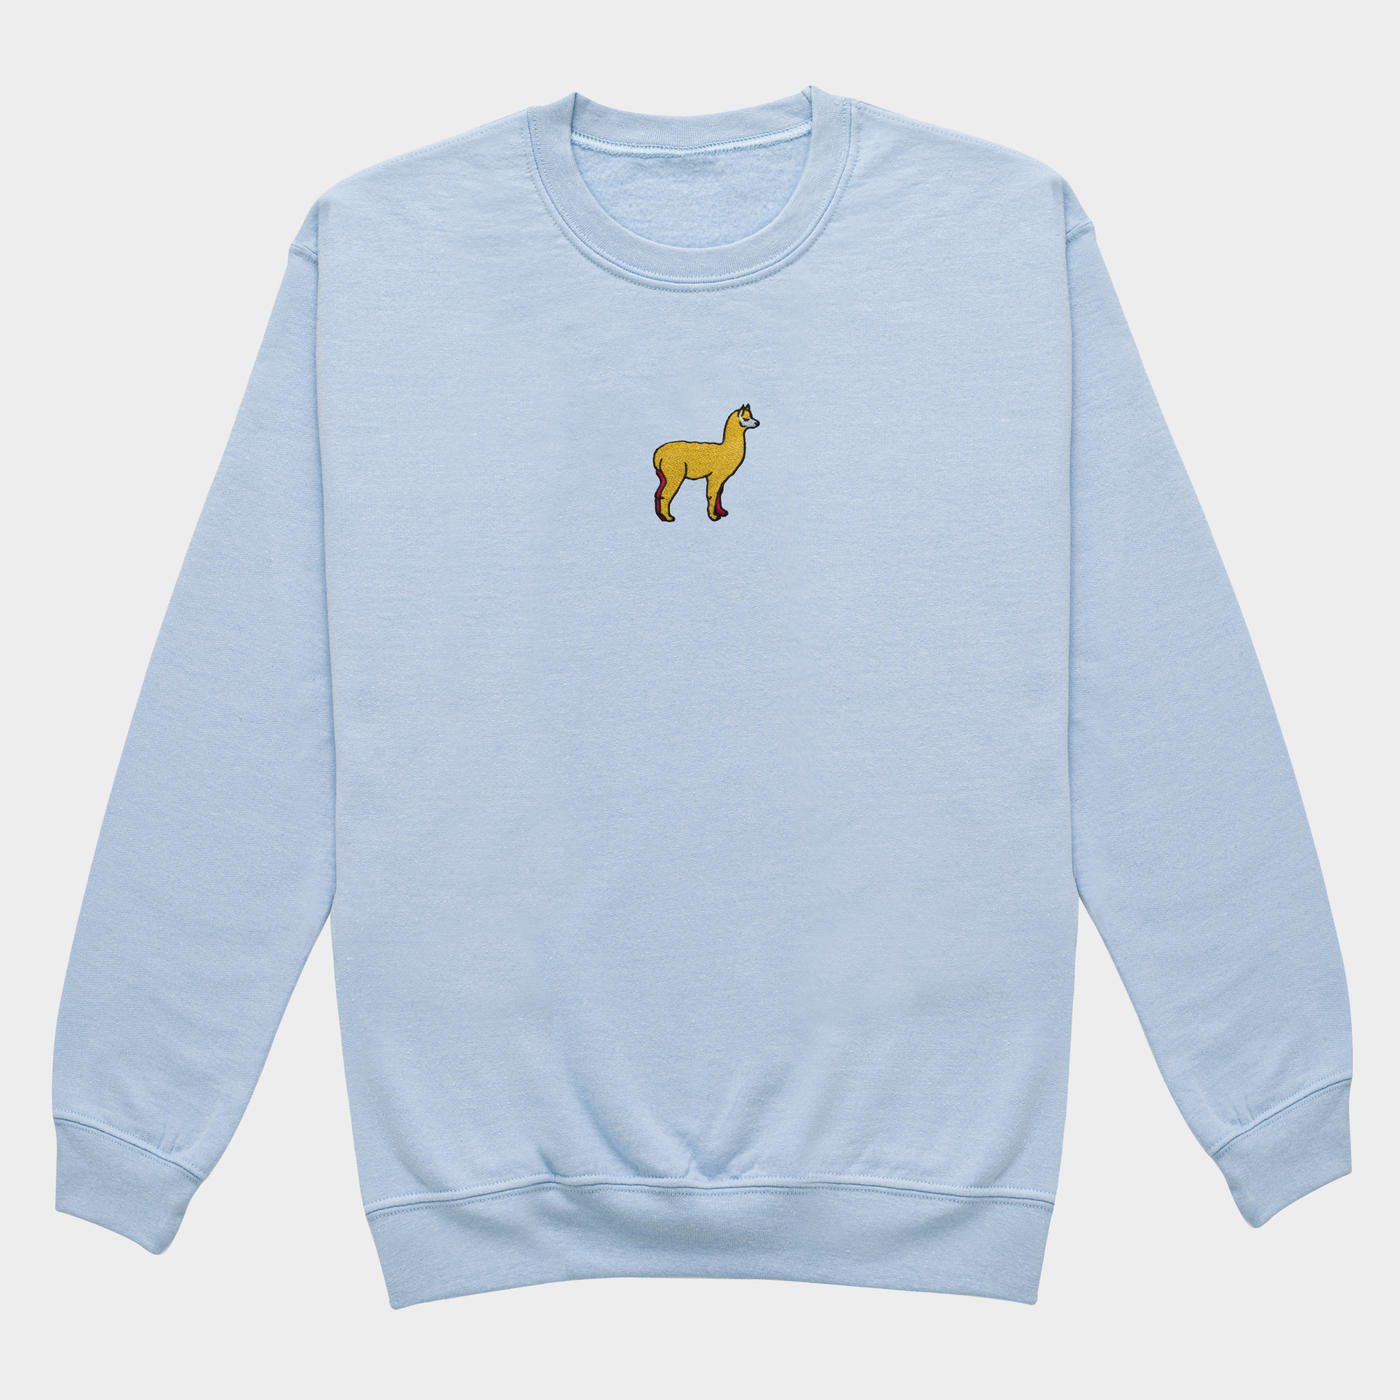 Bobby's Planet Women's Embroidered Alpaca Sweatshirt from South American Amazon Animals Collection in Light Blue Color#color_light-blue